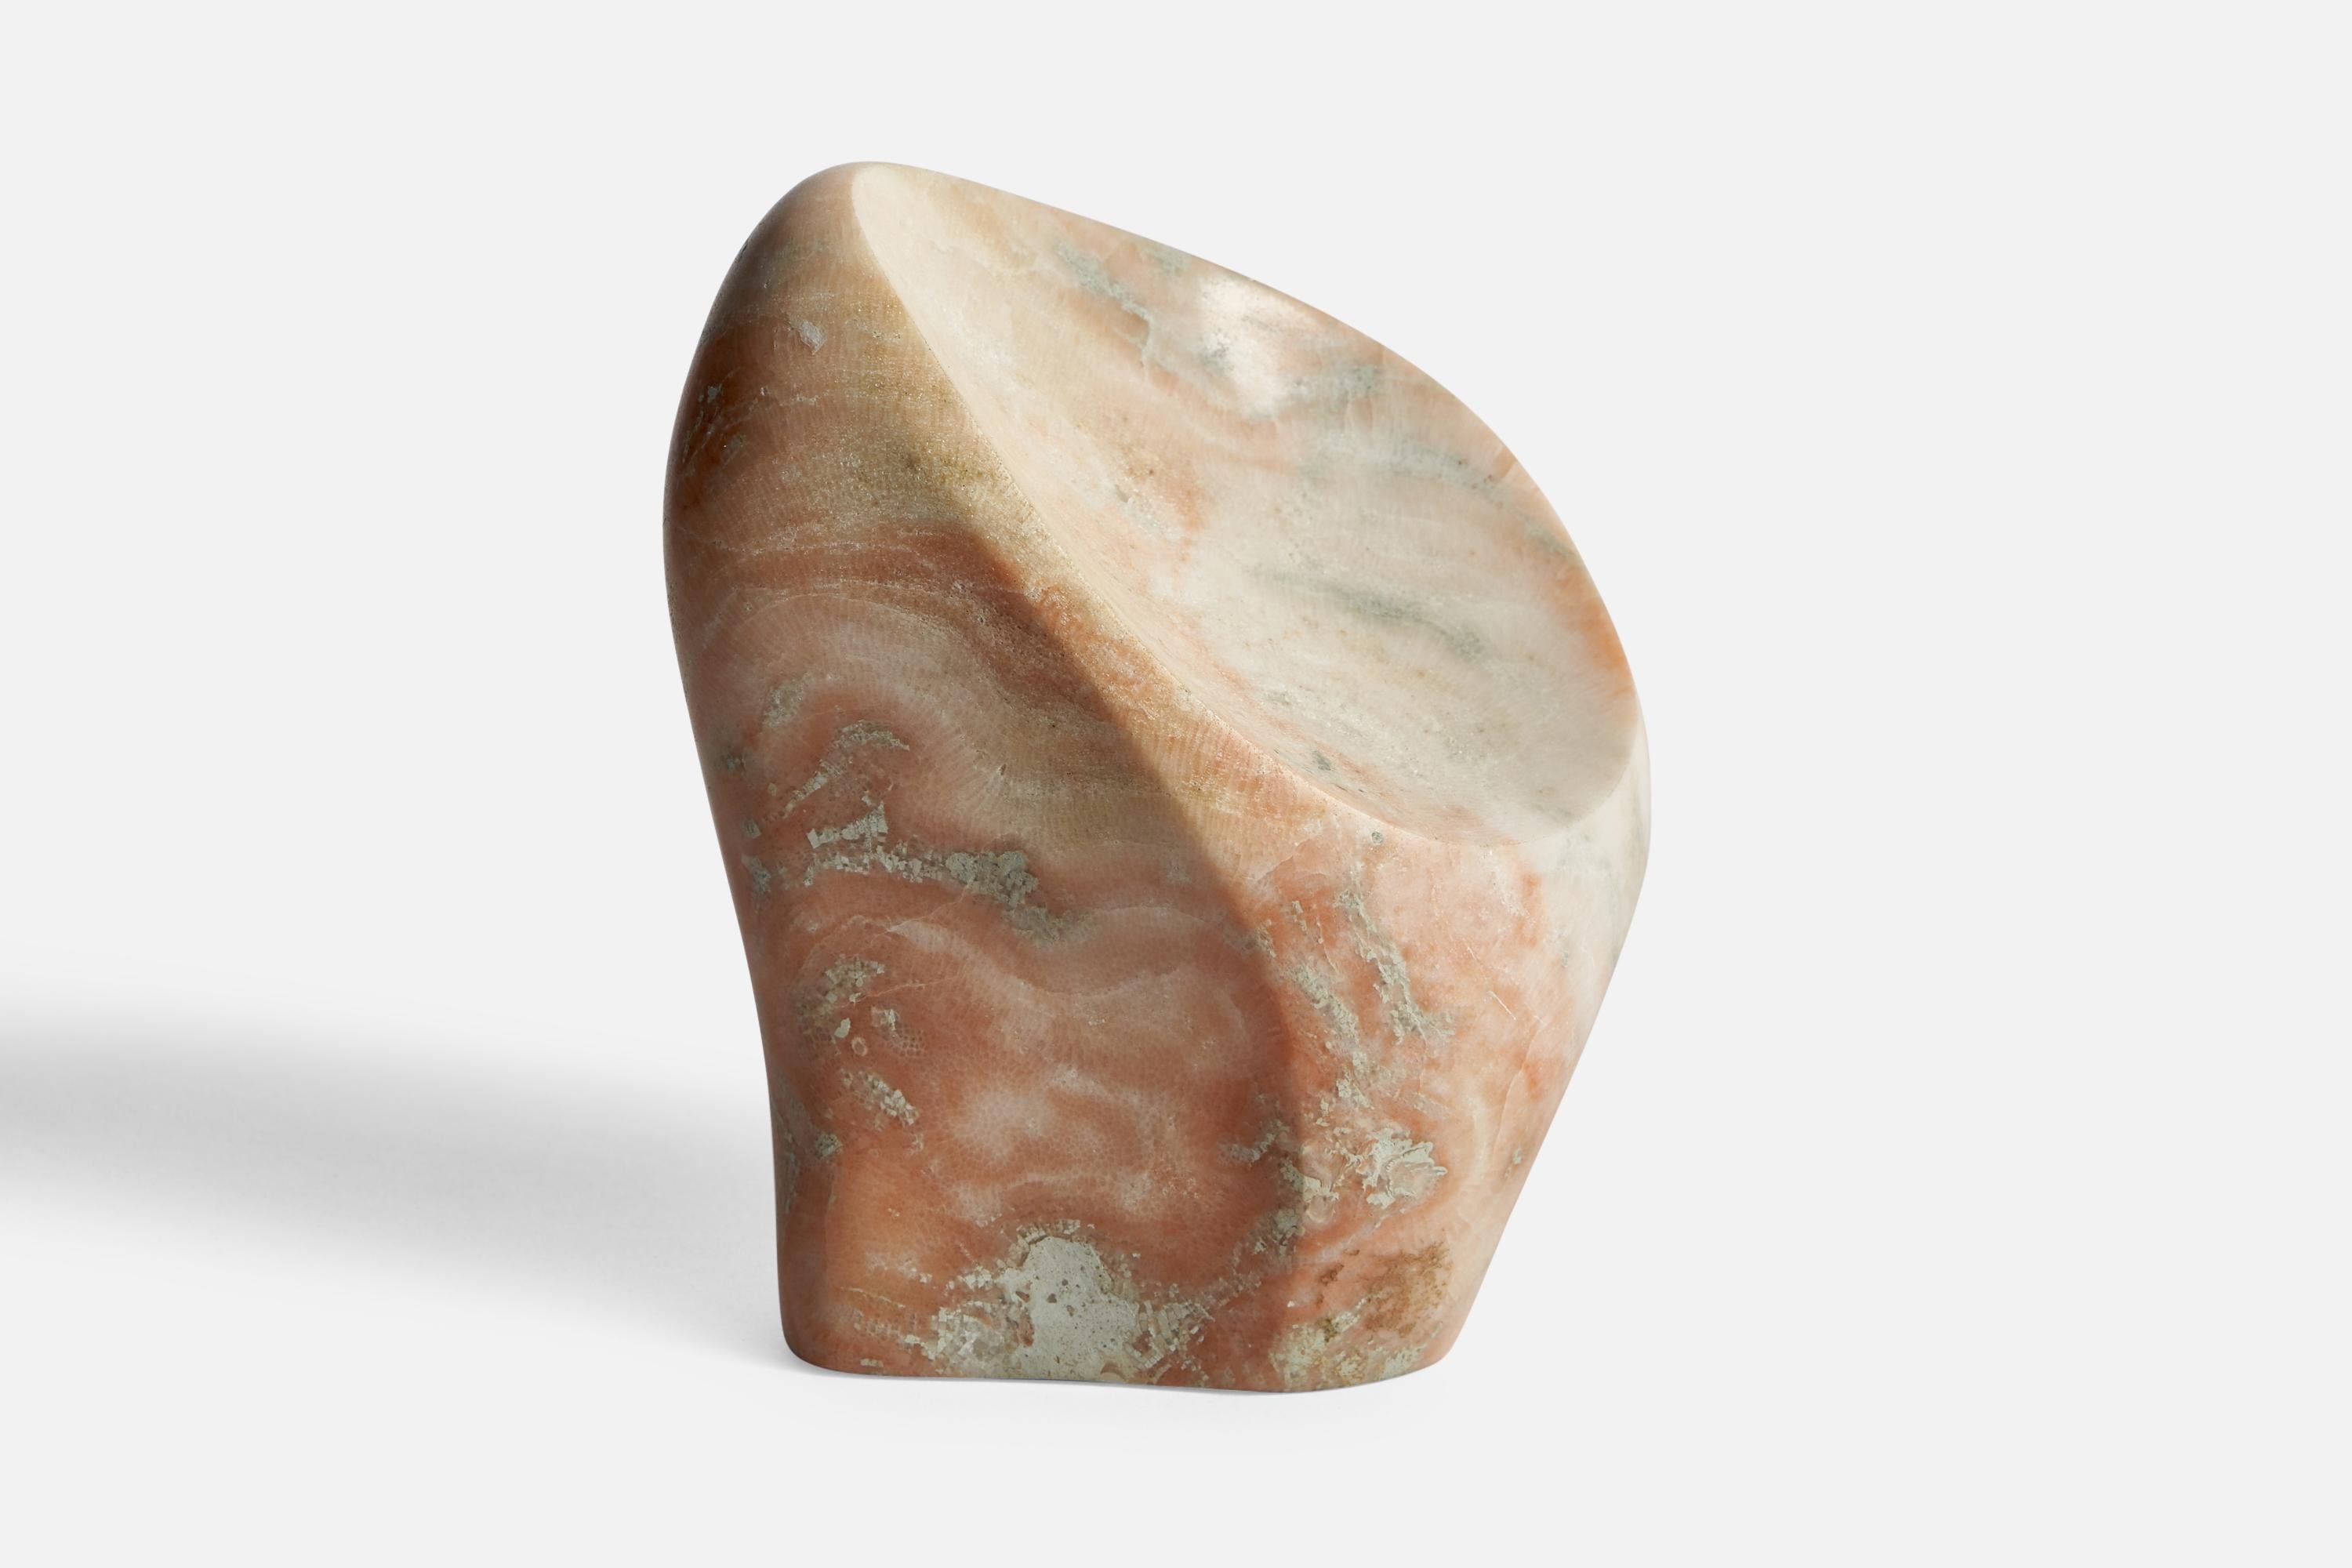 A small marble sculpture designed and produced in the US, c. 1950s.